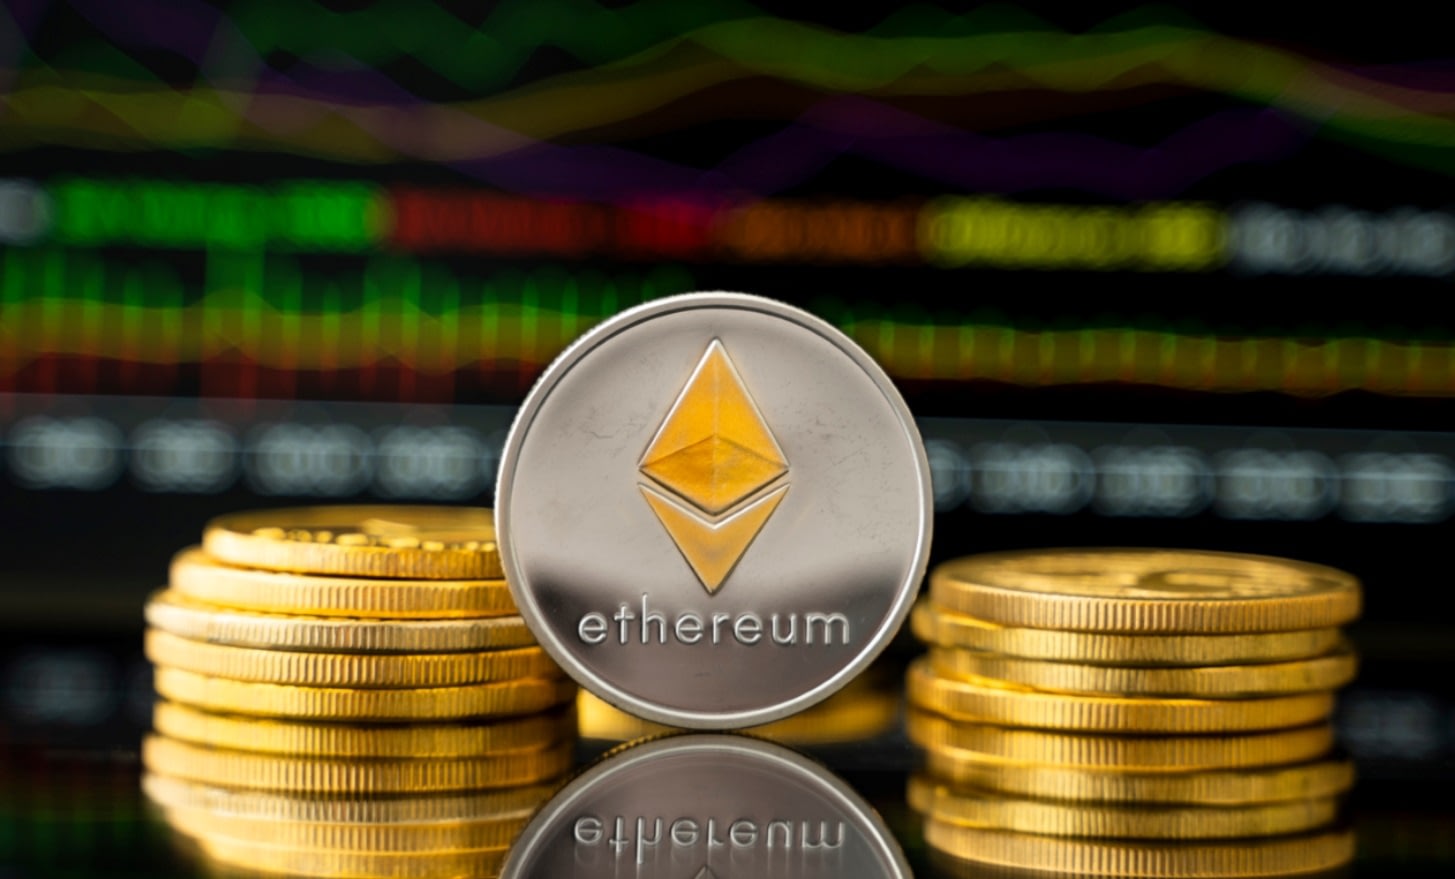 Ethereum (ETH) gained 7% in 24 hours: here’s where to buy it